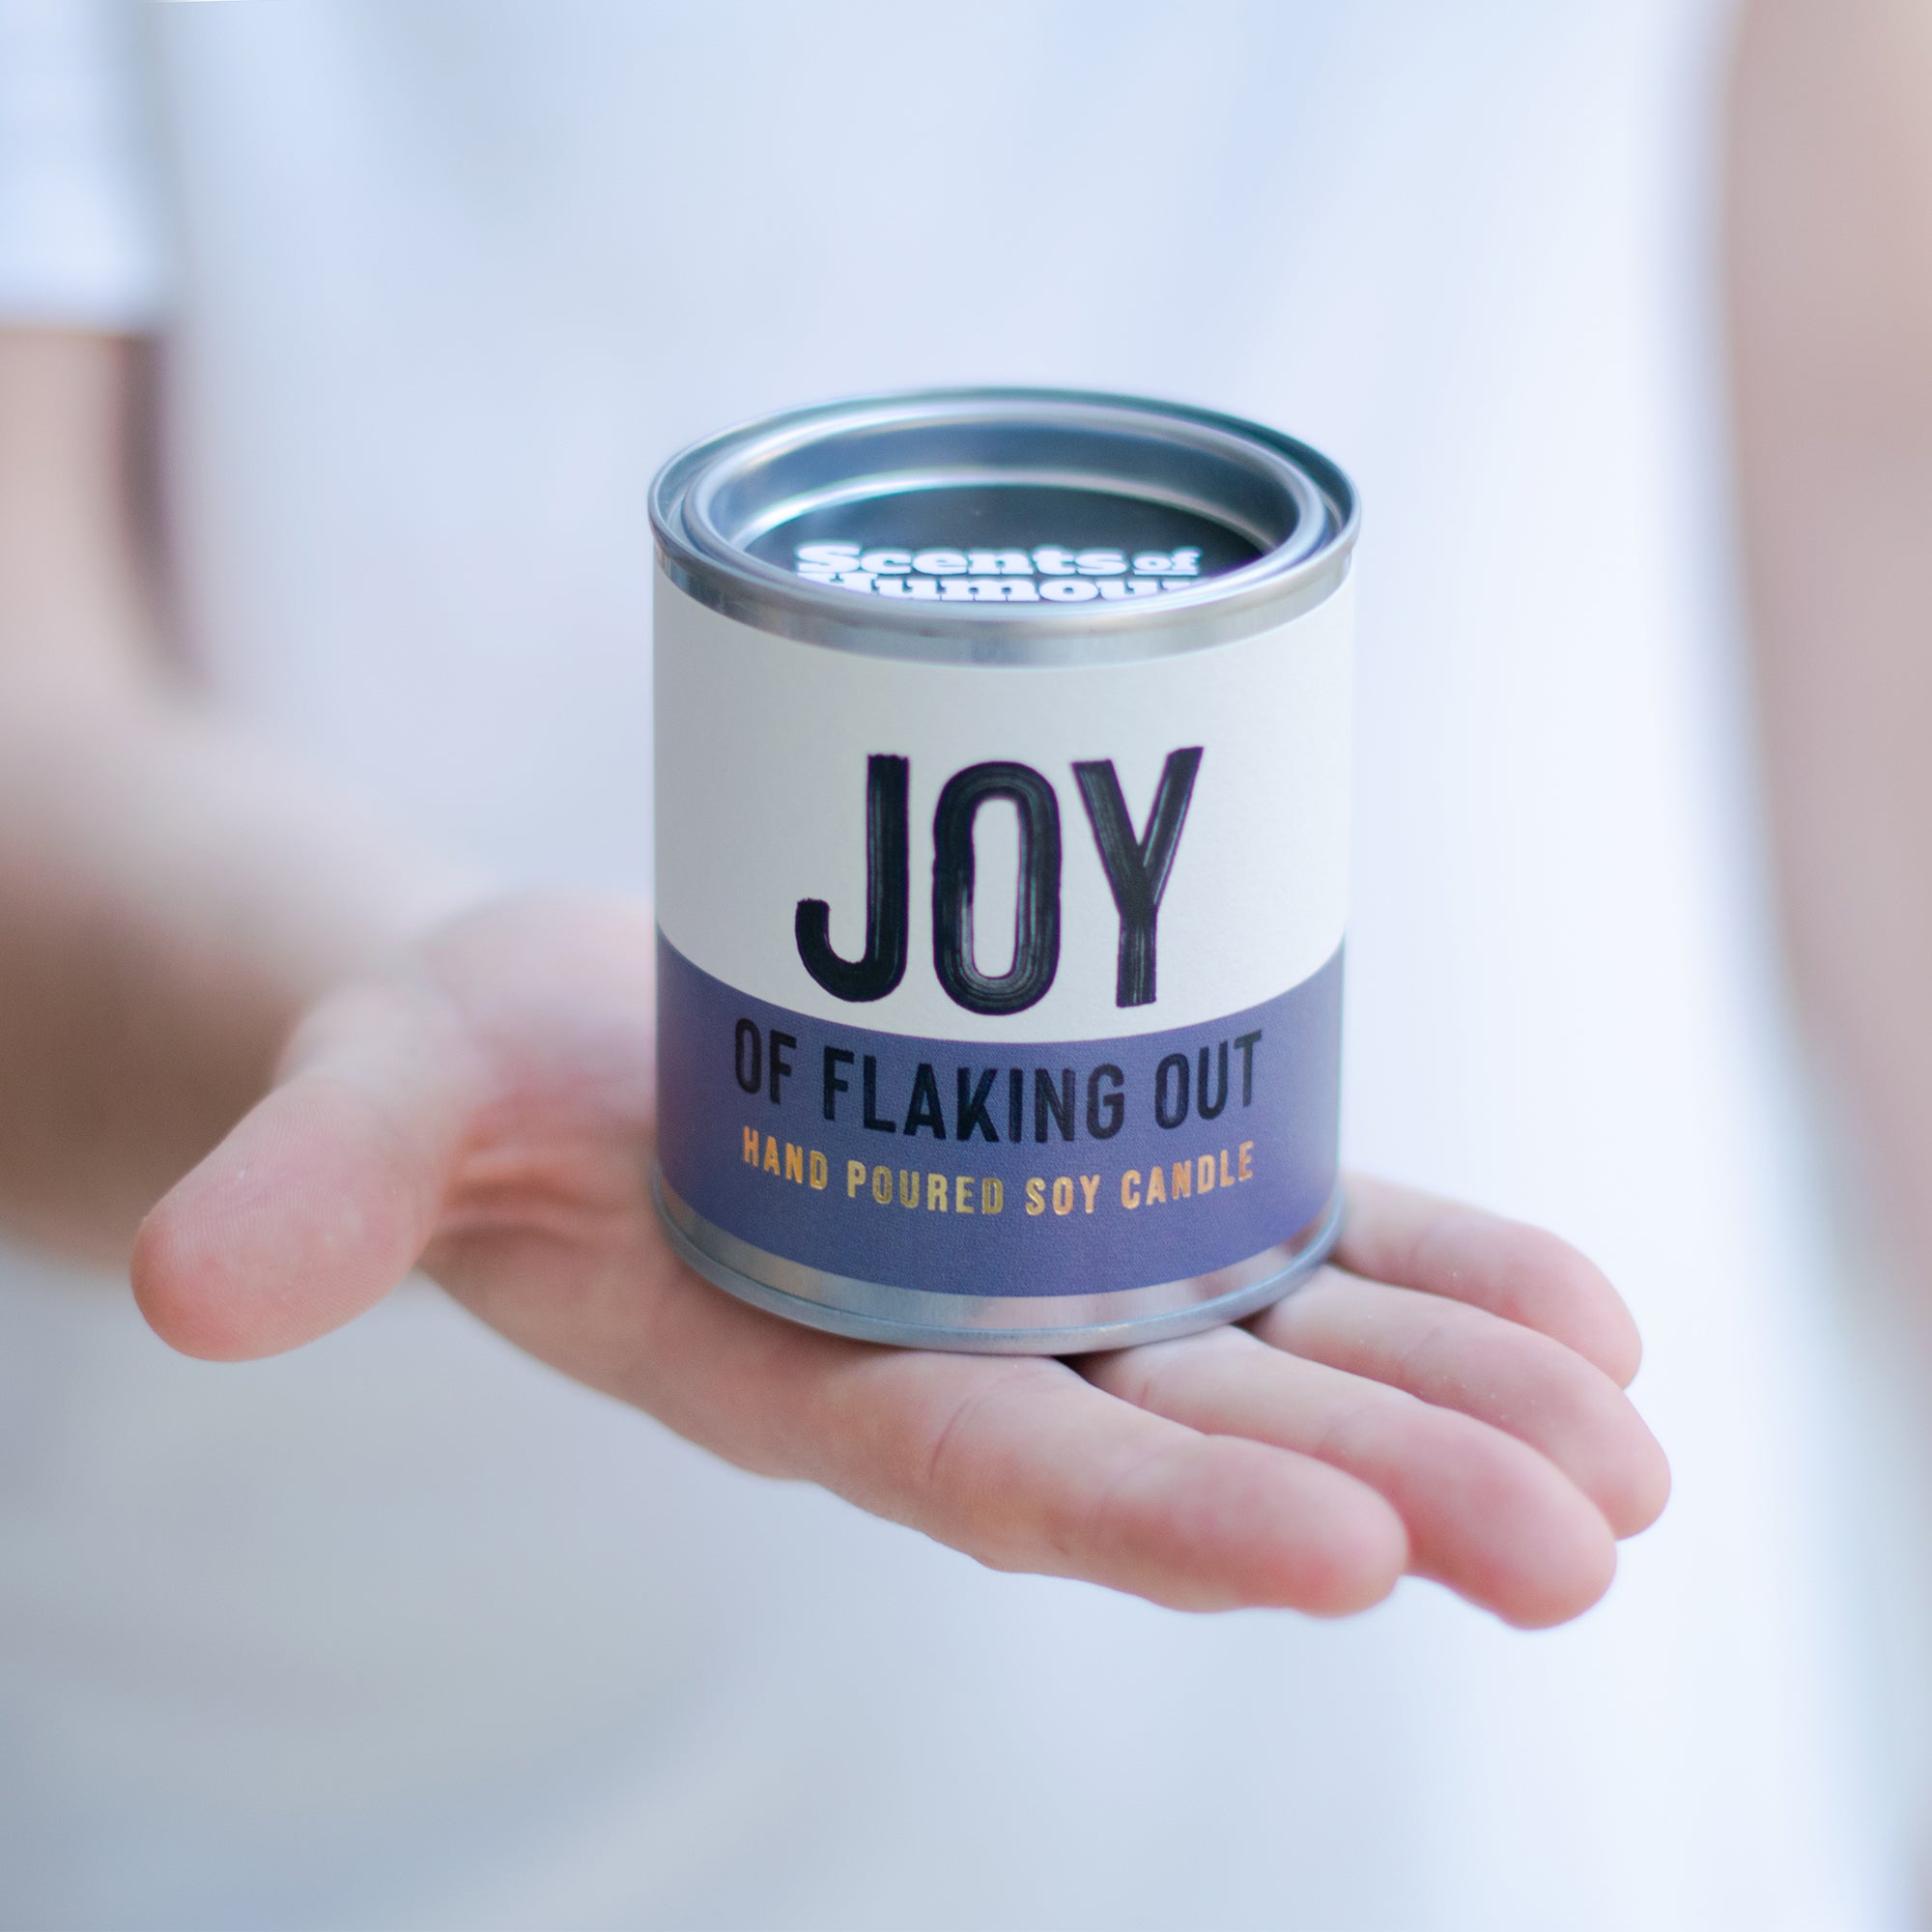 Joy of Flaking Out - Chocolate scented candle